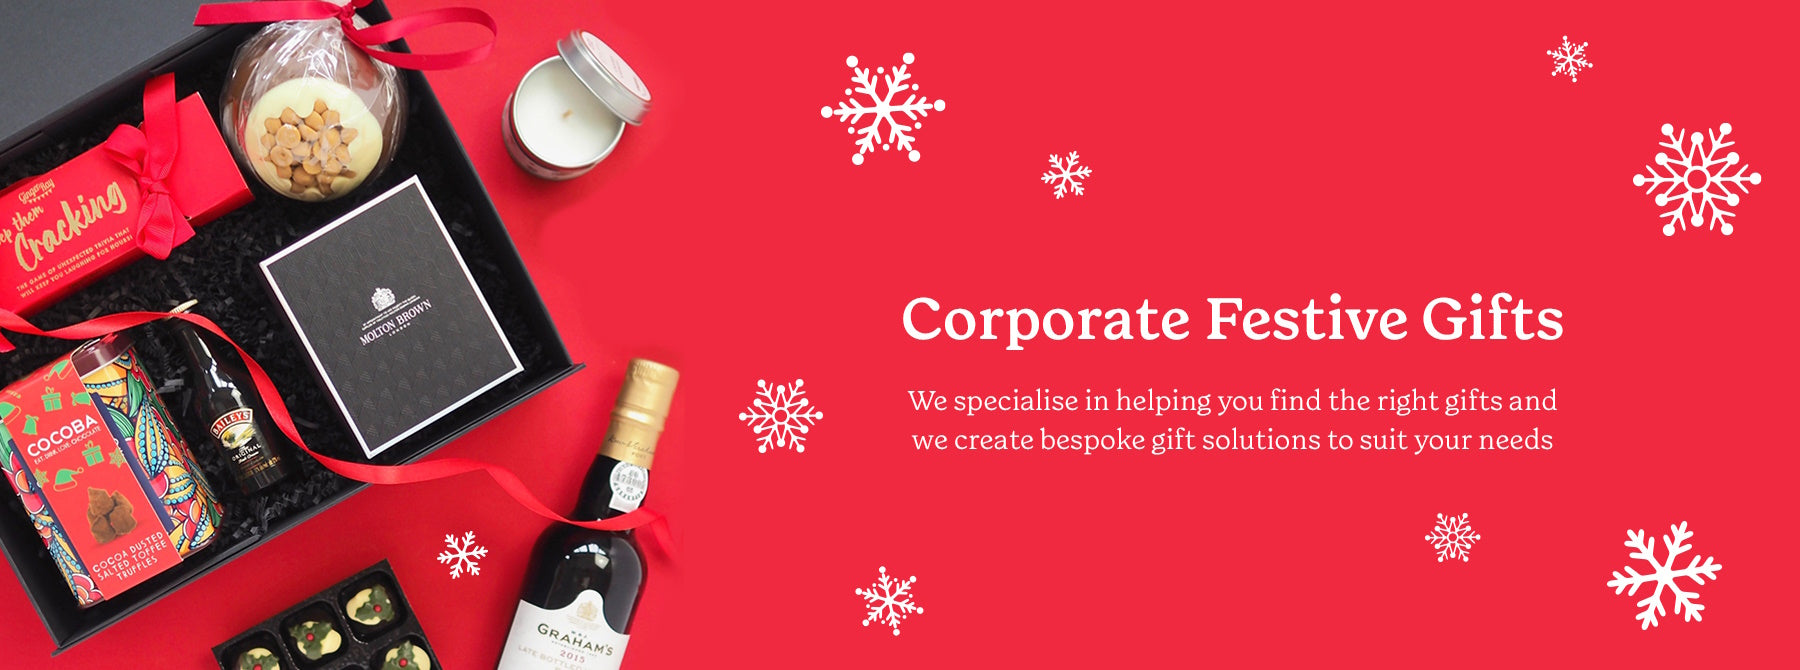 Corporate Christmas Gifts Hampers